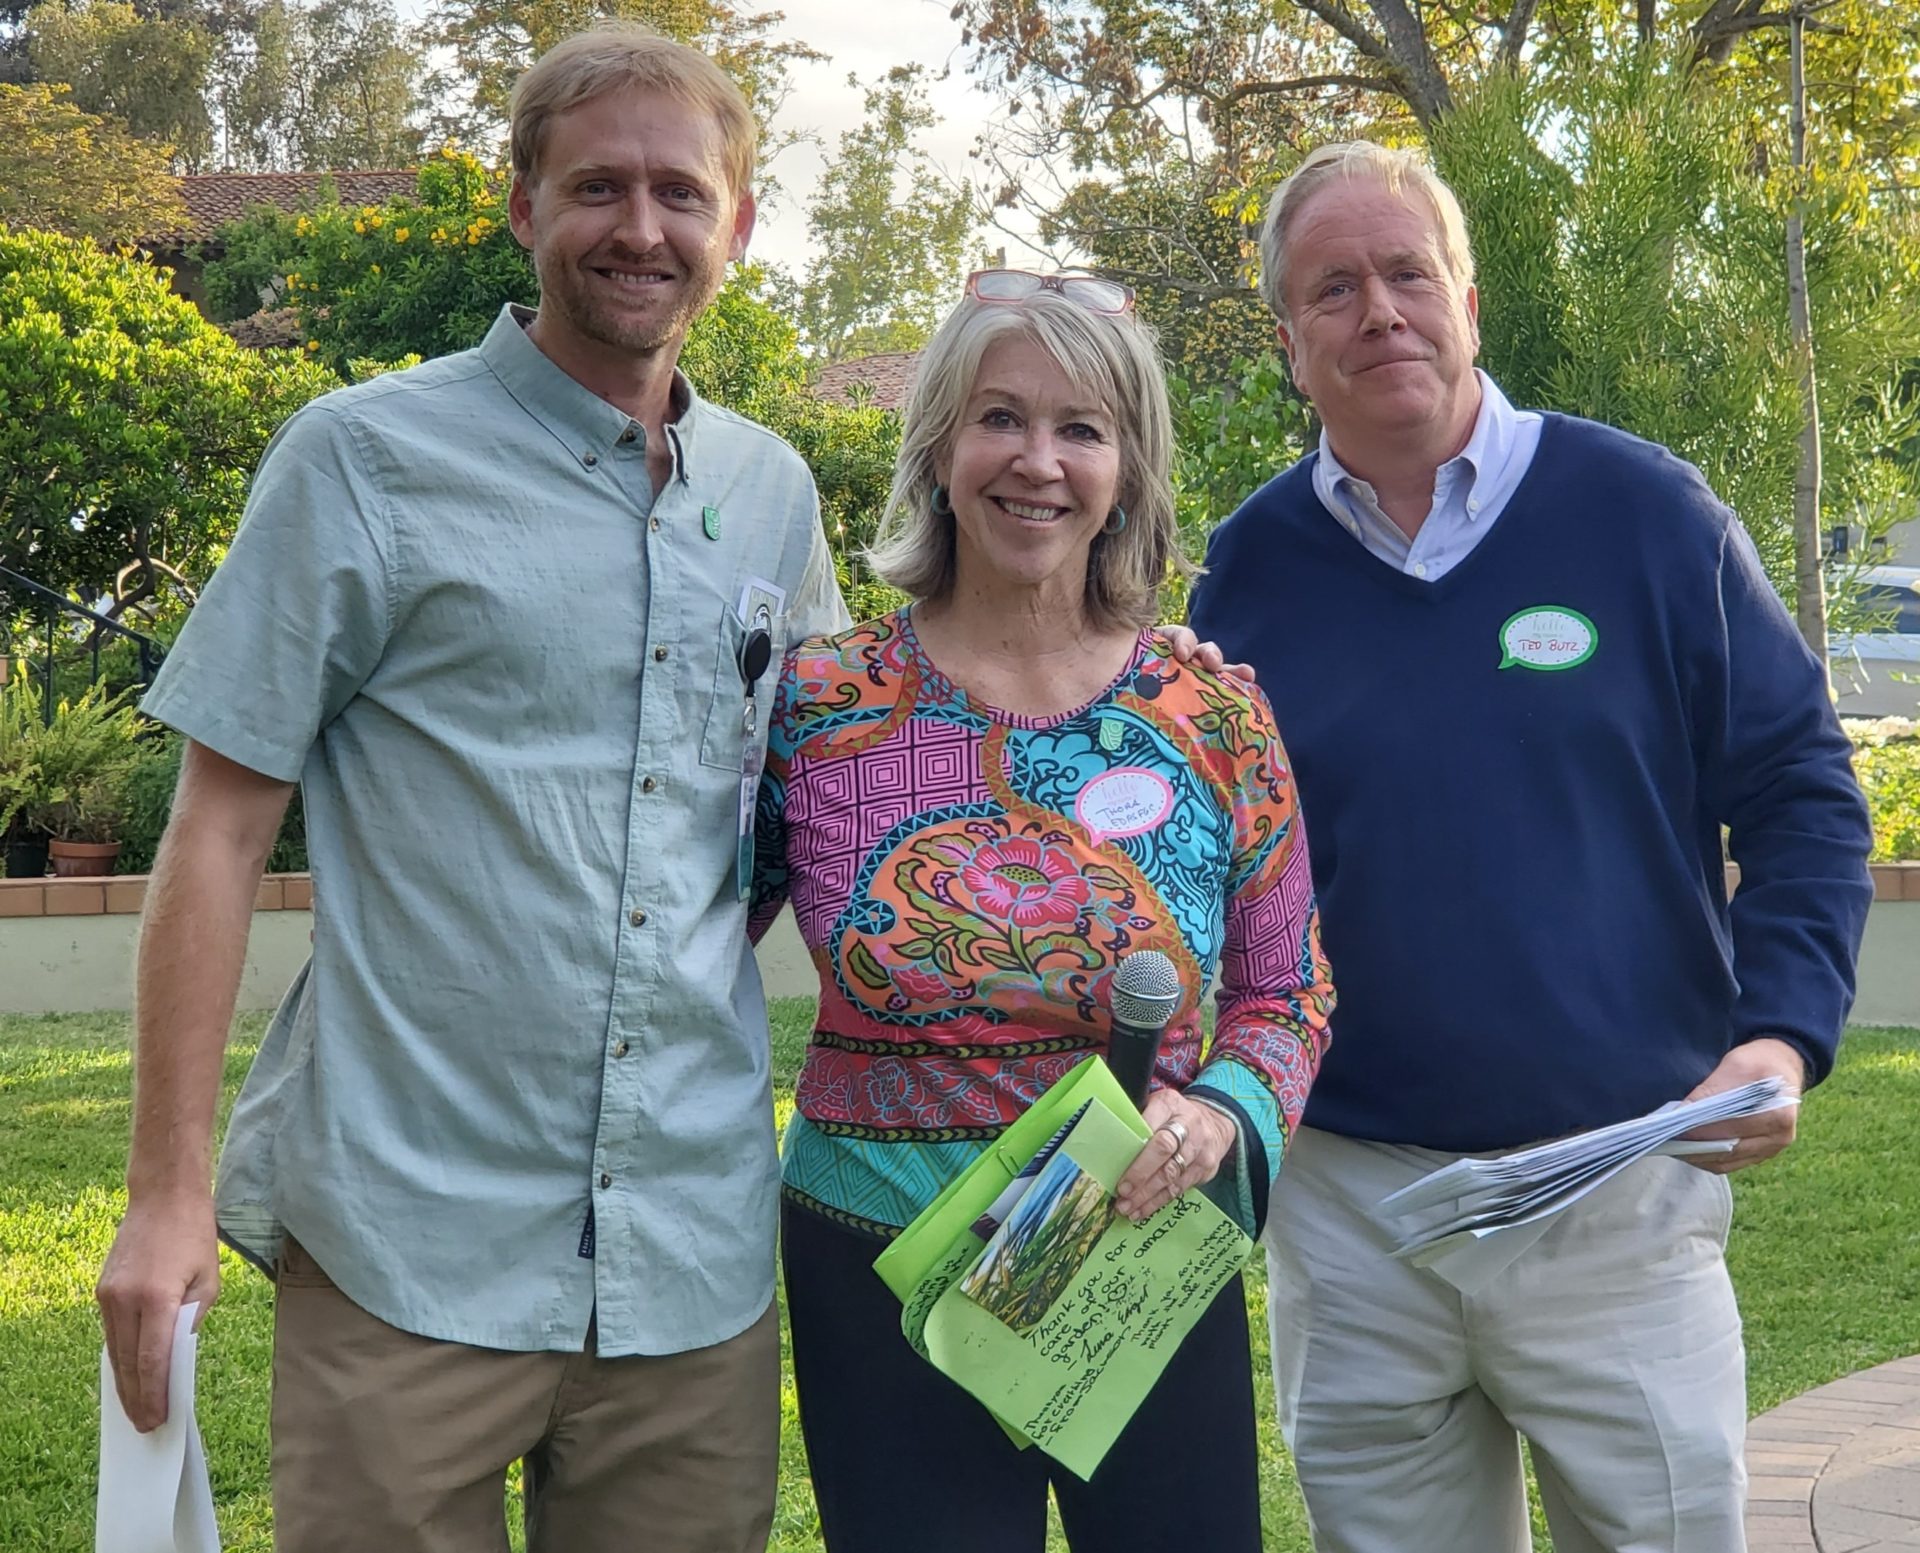 Nature Collective Associate Biologist Joe DeWolf, with Rancho Santa Fe Garden Club Executive Director Thora Guthrie, and Club President and Director Ted Butz at the May 29 Awards Celebration